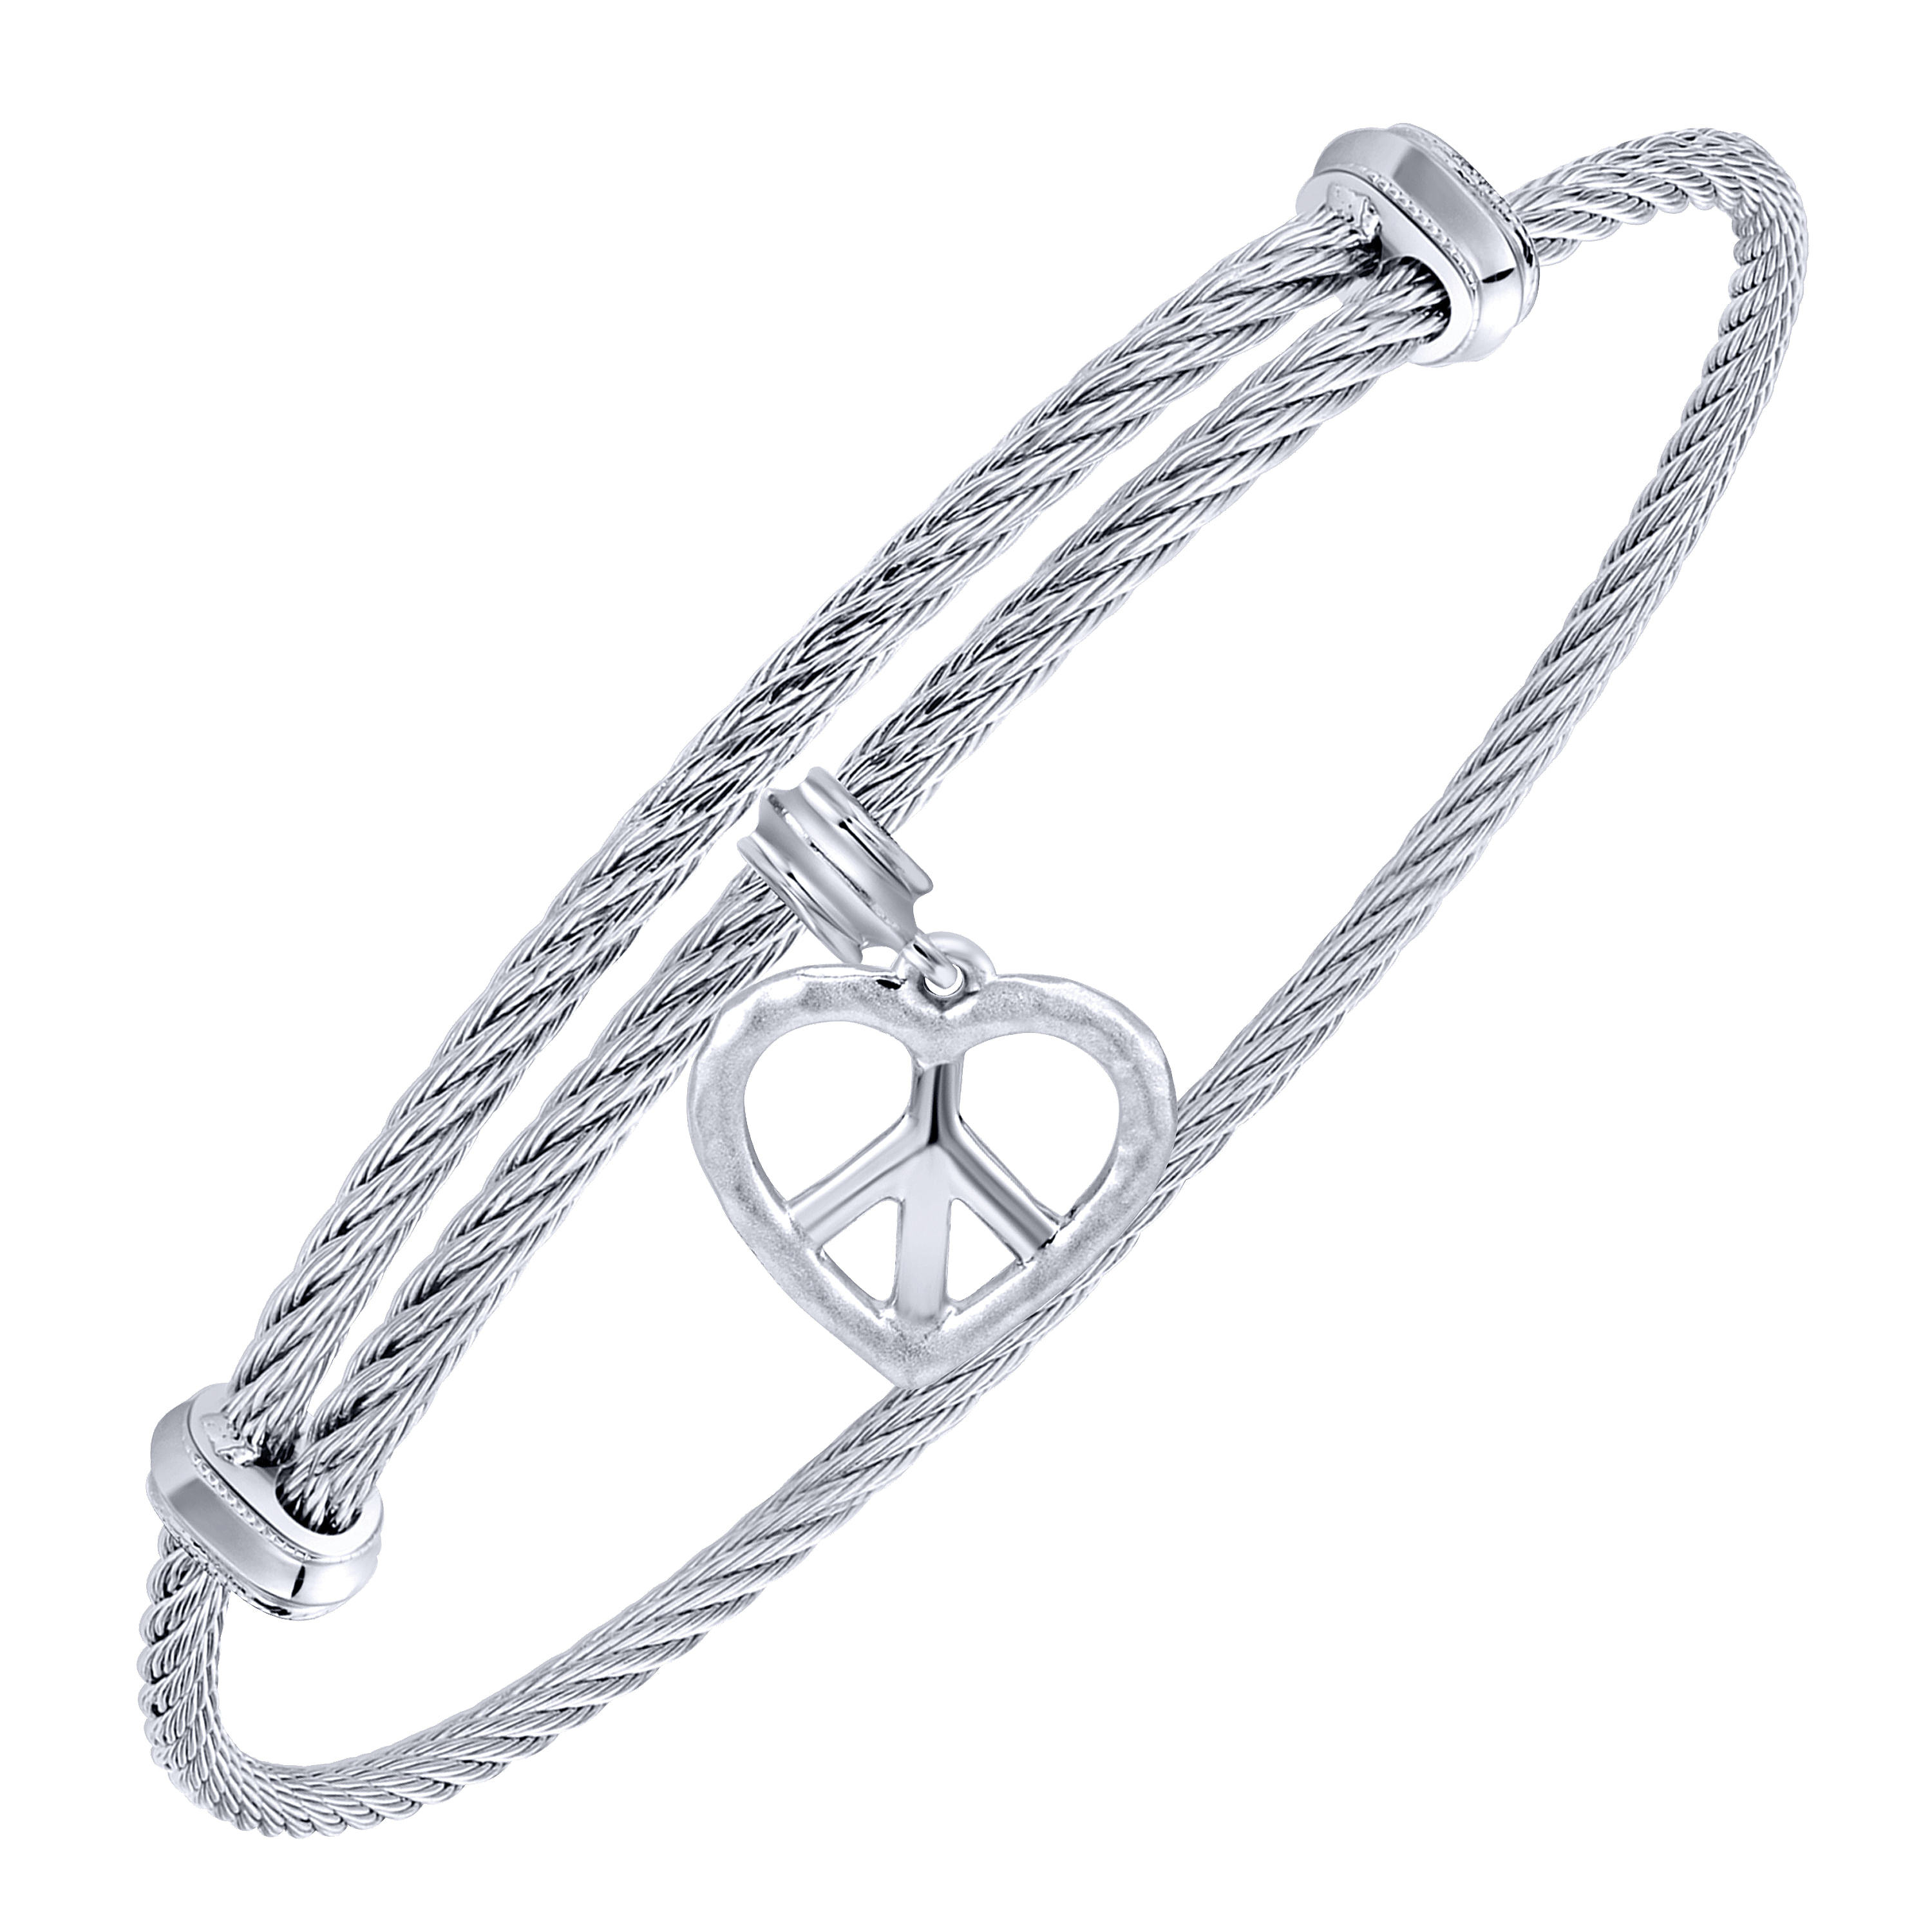 Adjustable Twisted Cable Stainless Steel Bangle with Sterling Silver Peace Heart Charm